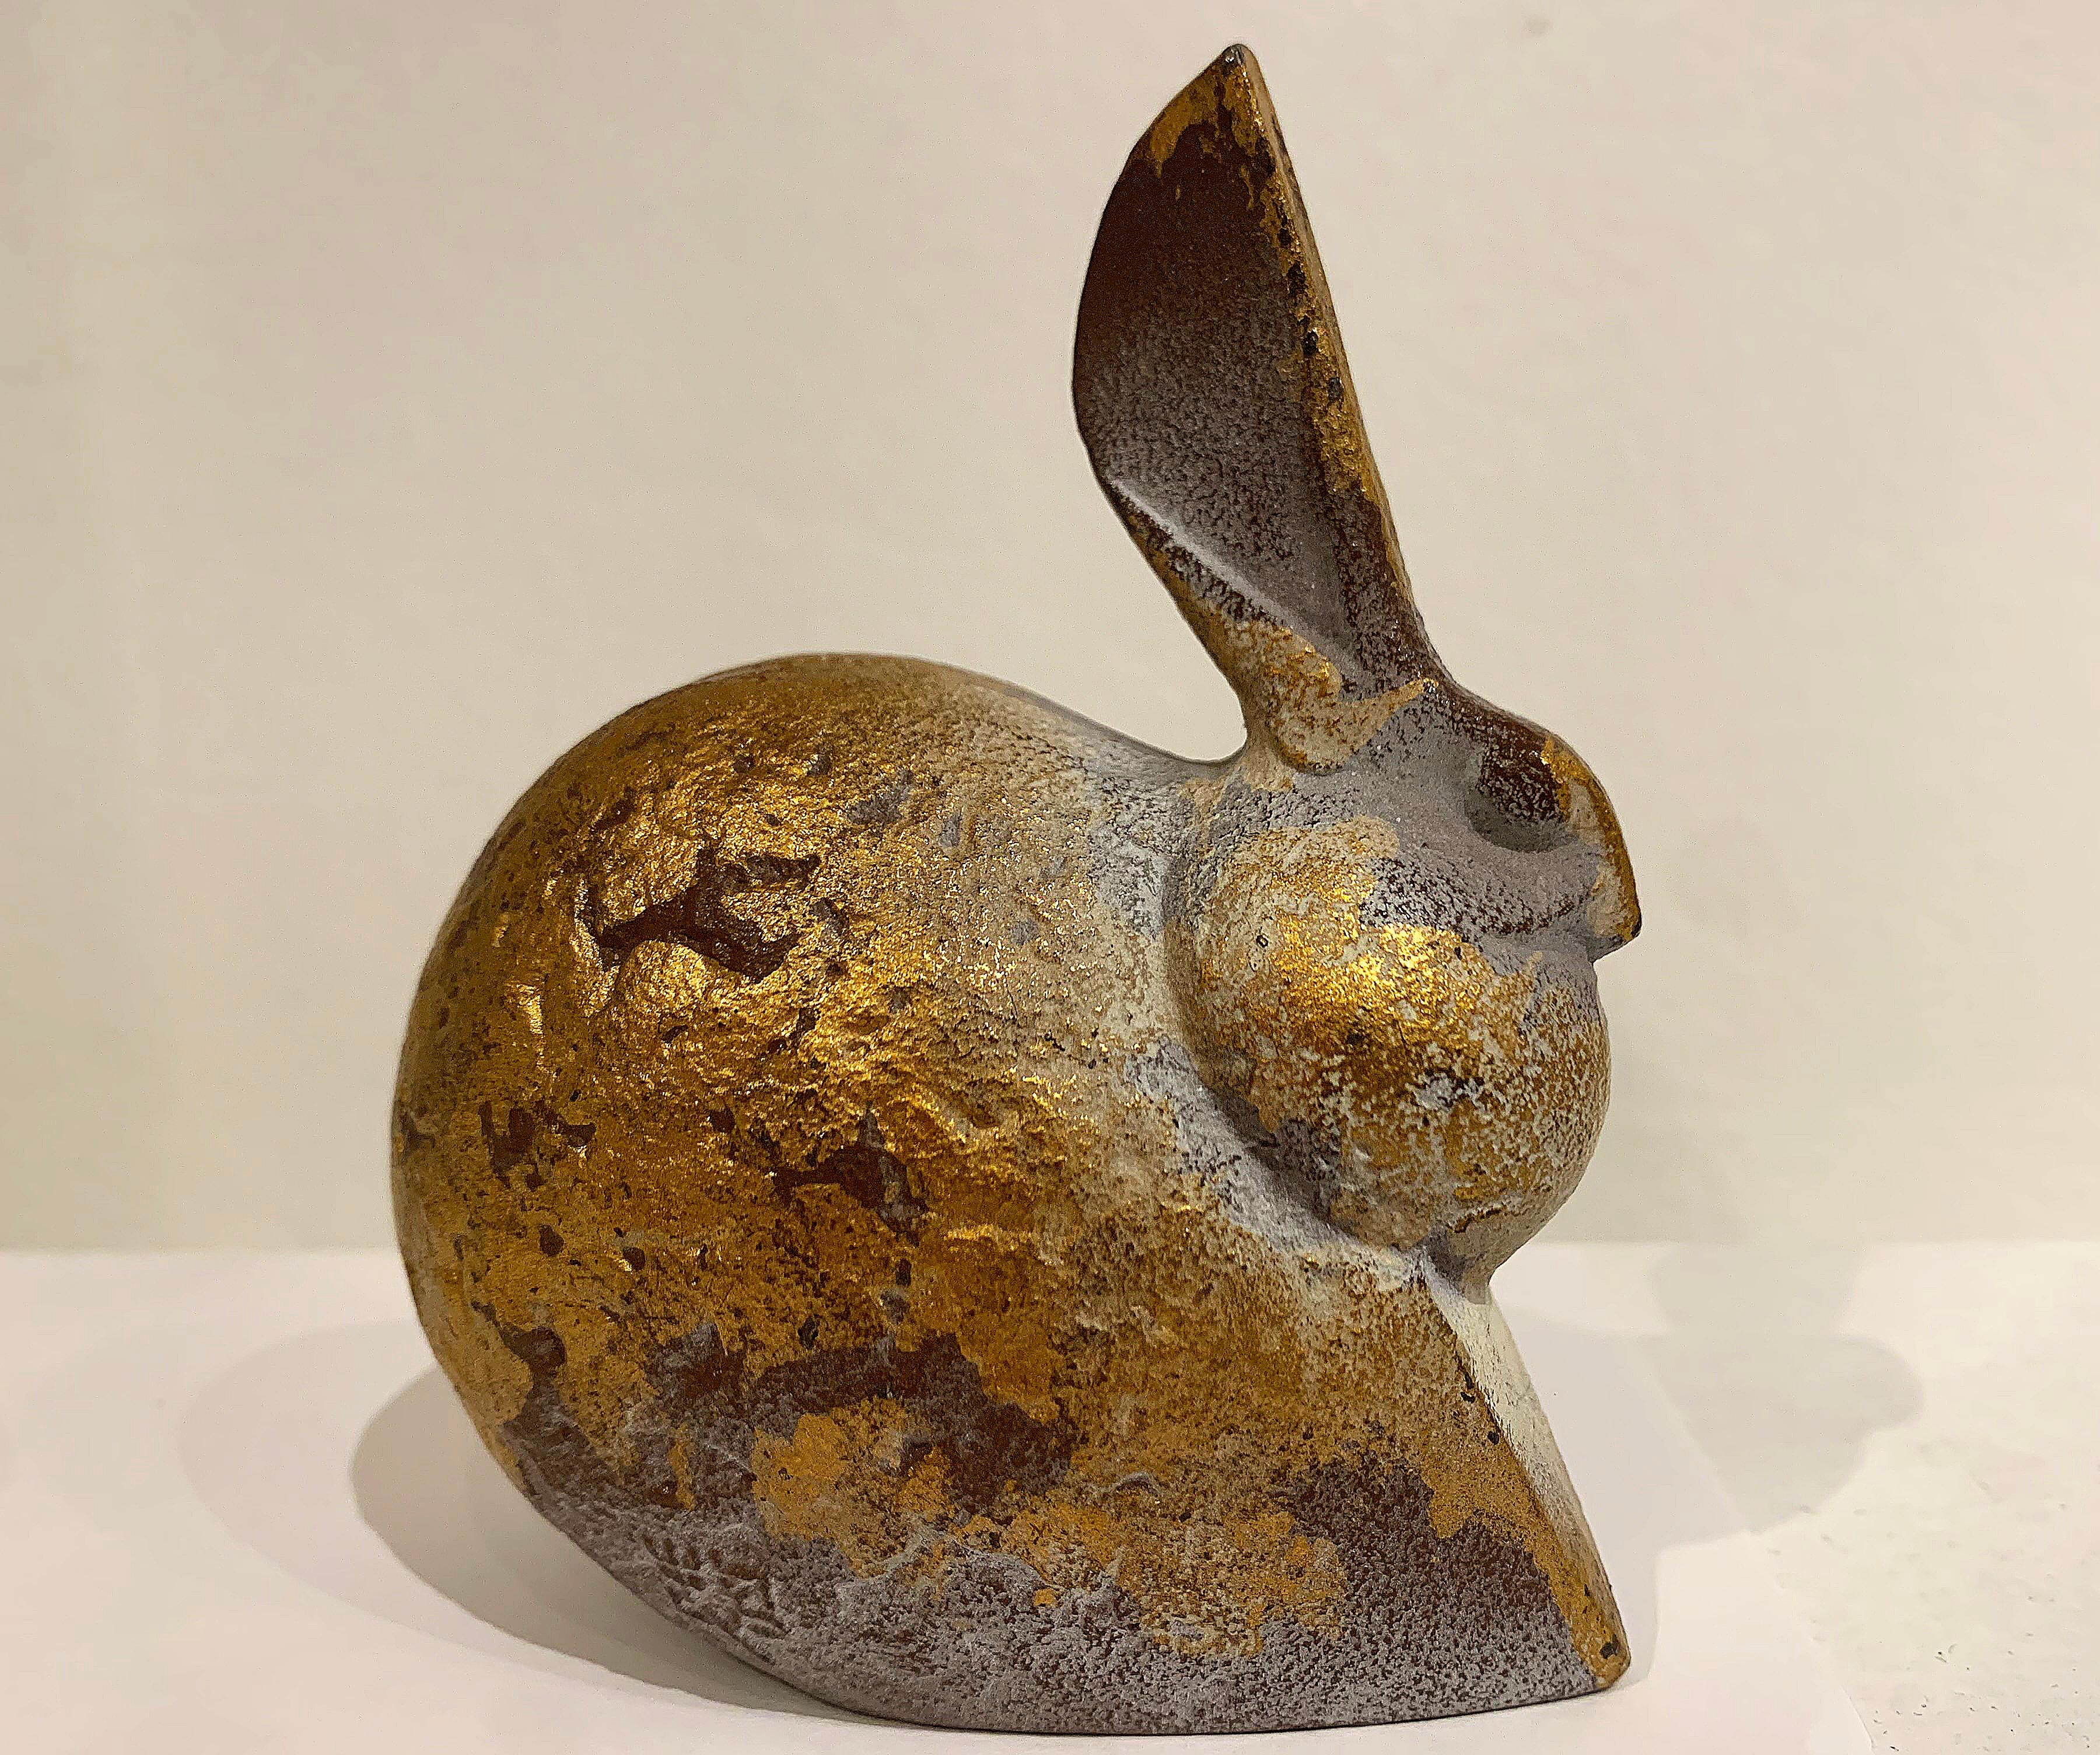 Hare, rabbit small sculpture or paperweight, gold paint, terracotta color finish - Art by Unknown